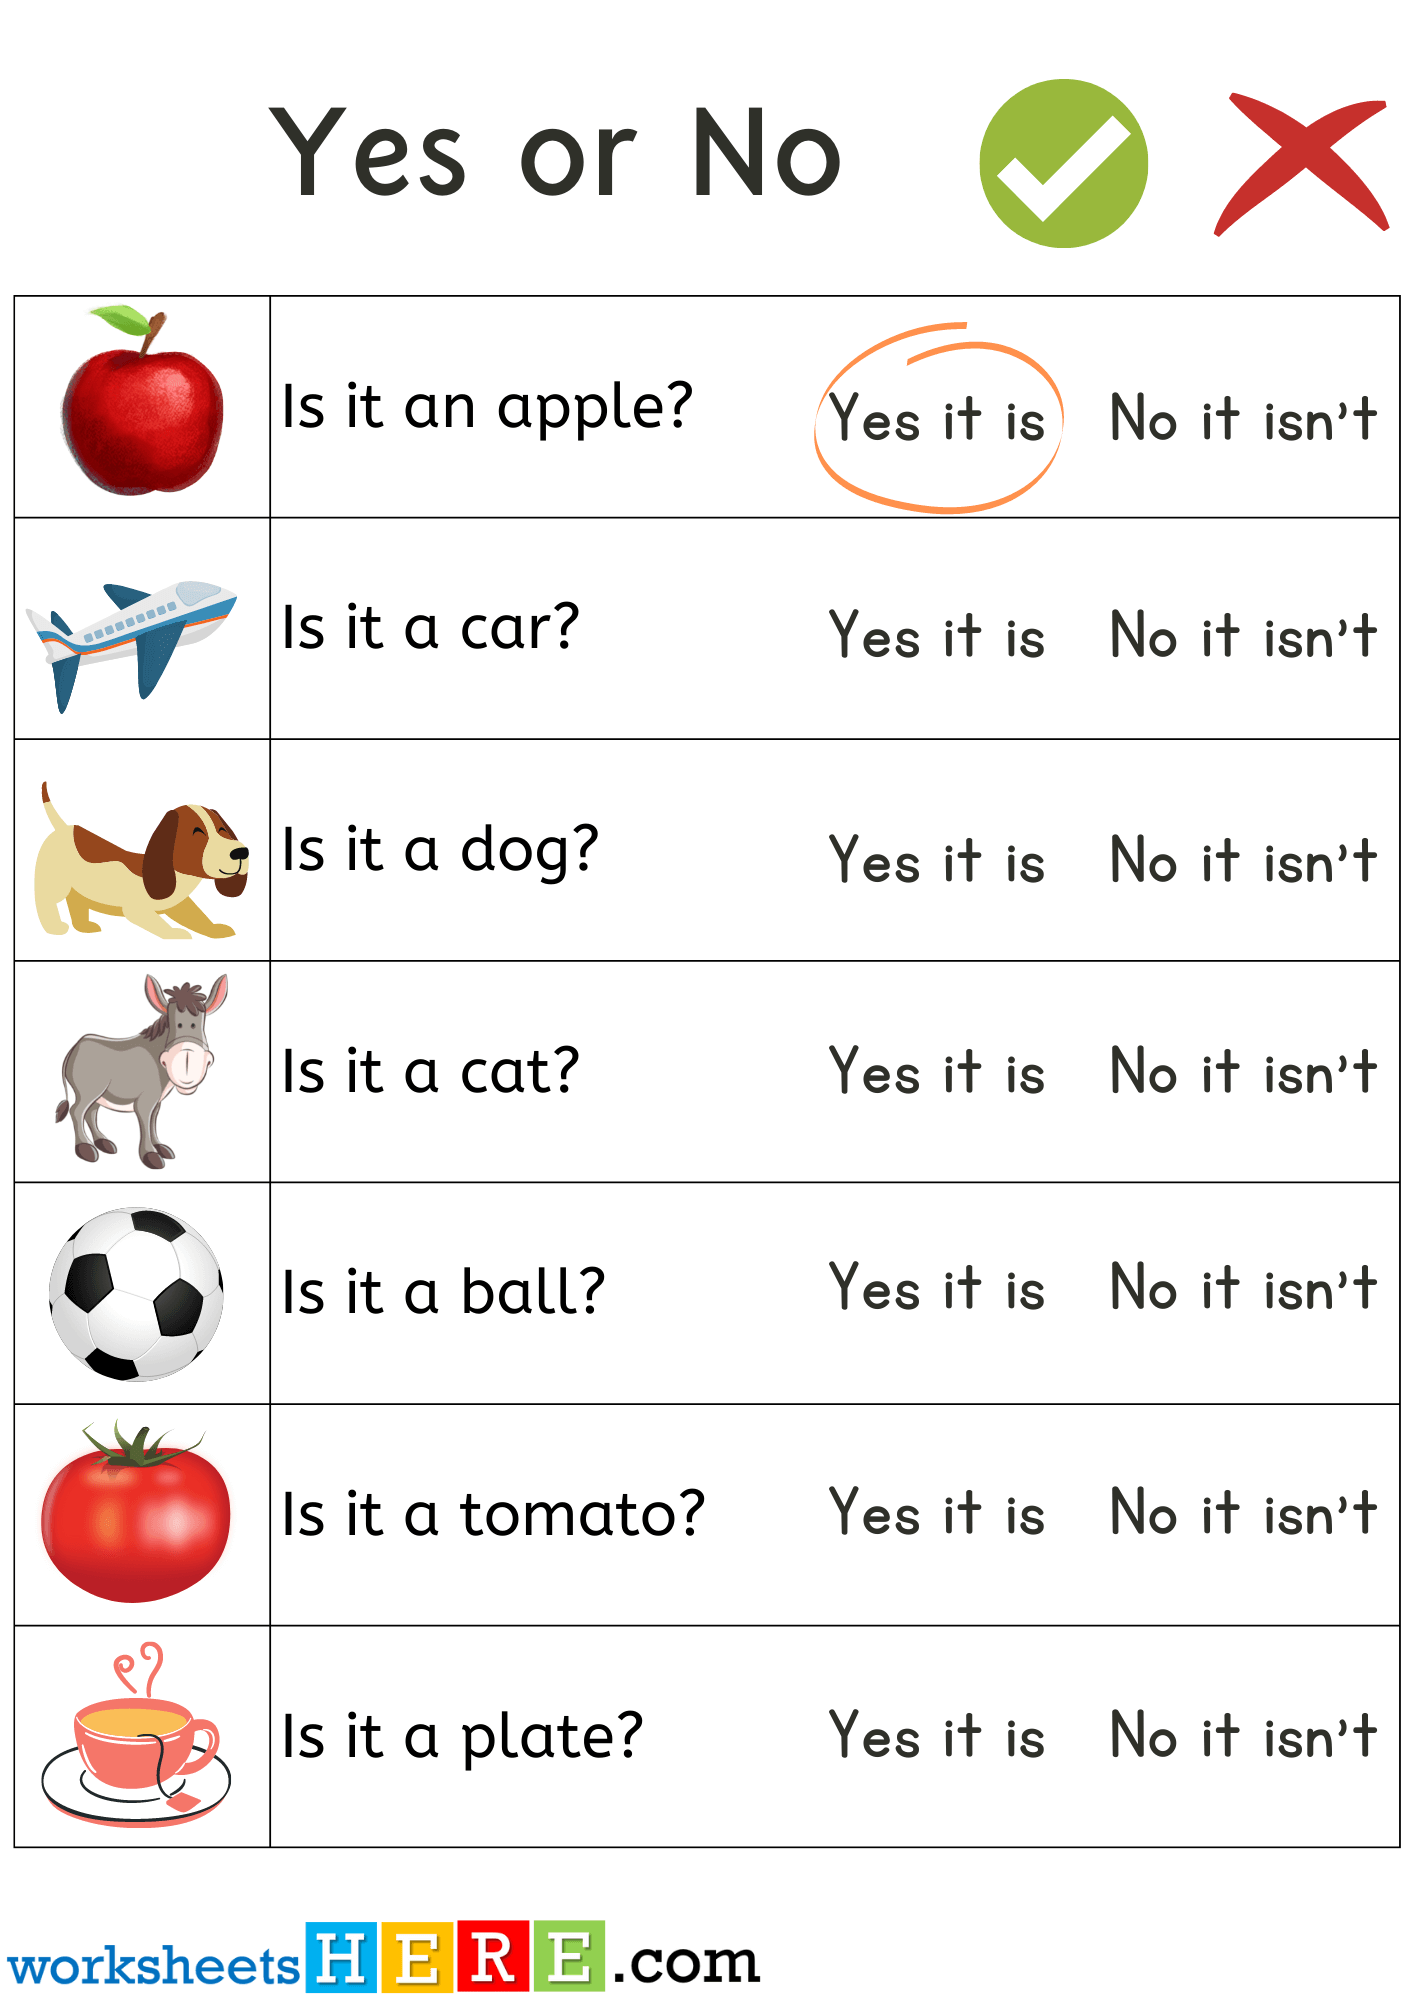 Yes or No Question Answers, Read and Circle Correct Answer with Objects Pictures PDF Worksheet